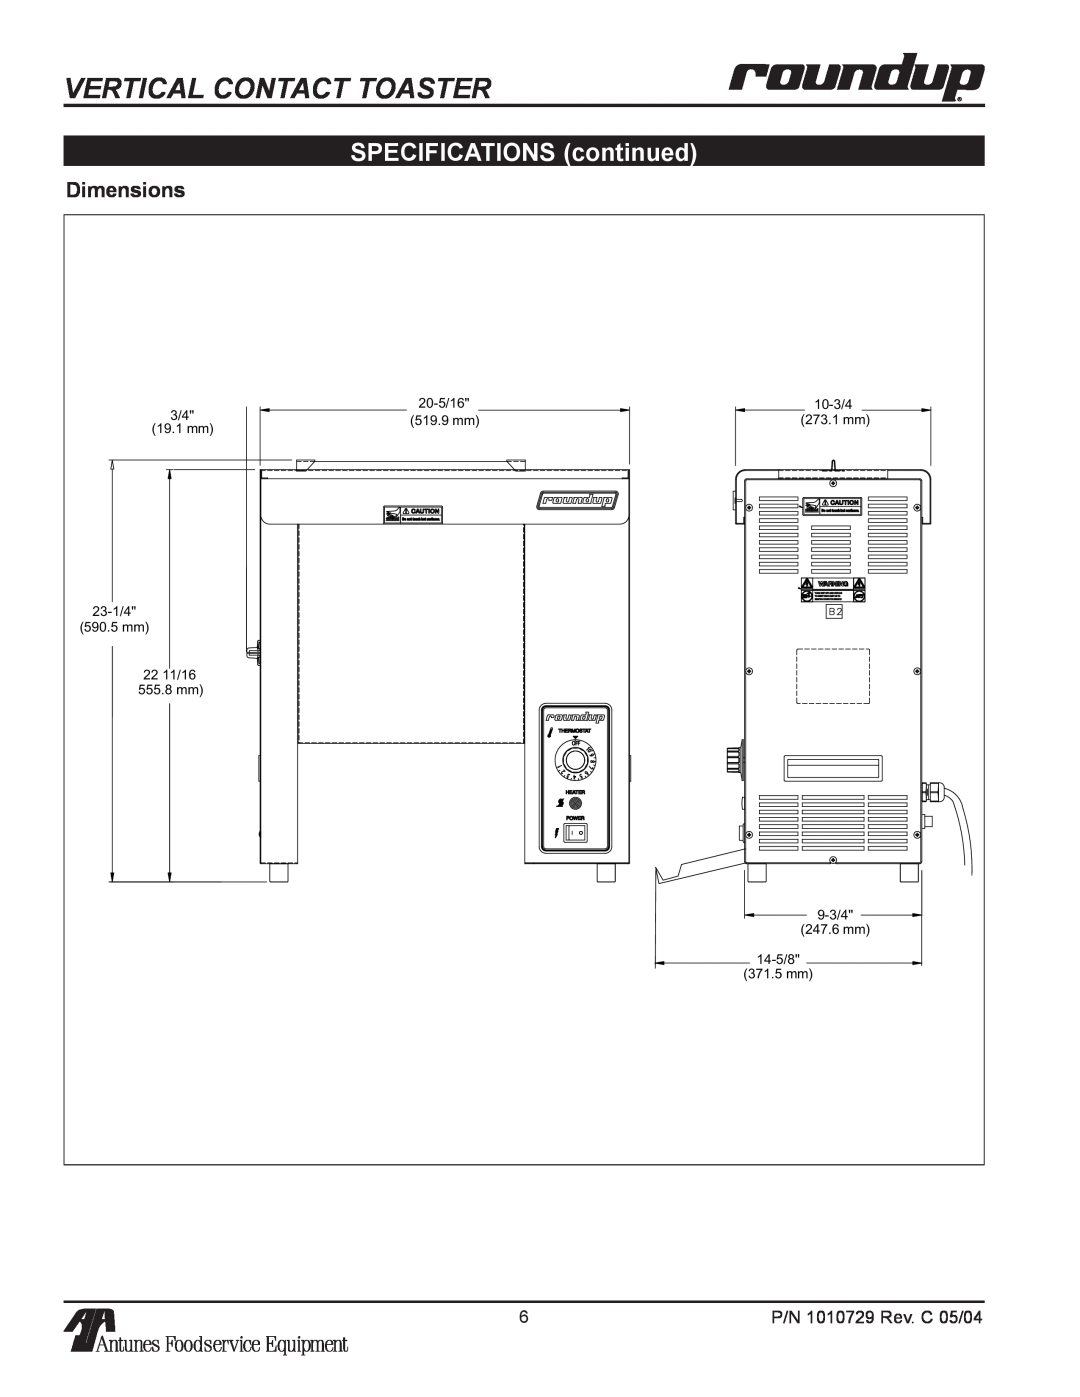 Antunes, AJ VCT-20, VCT-50, VCT-25 owner manual SPECIFICATIONS continued, Vertical Contact Toaster, Dimensions 